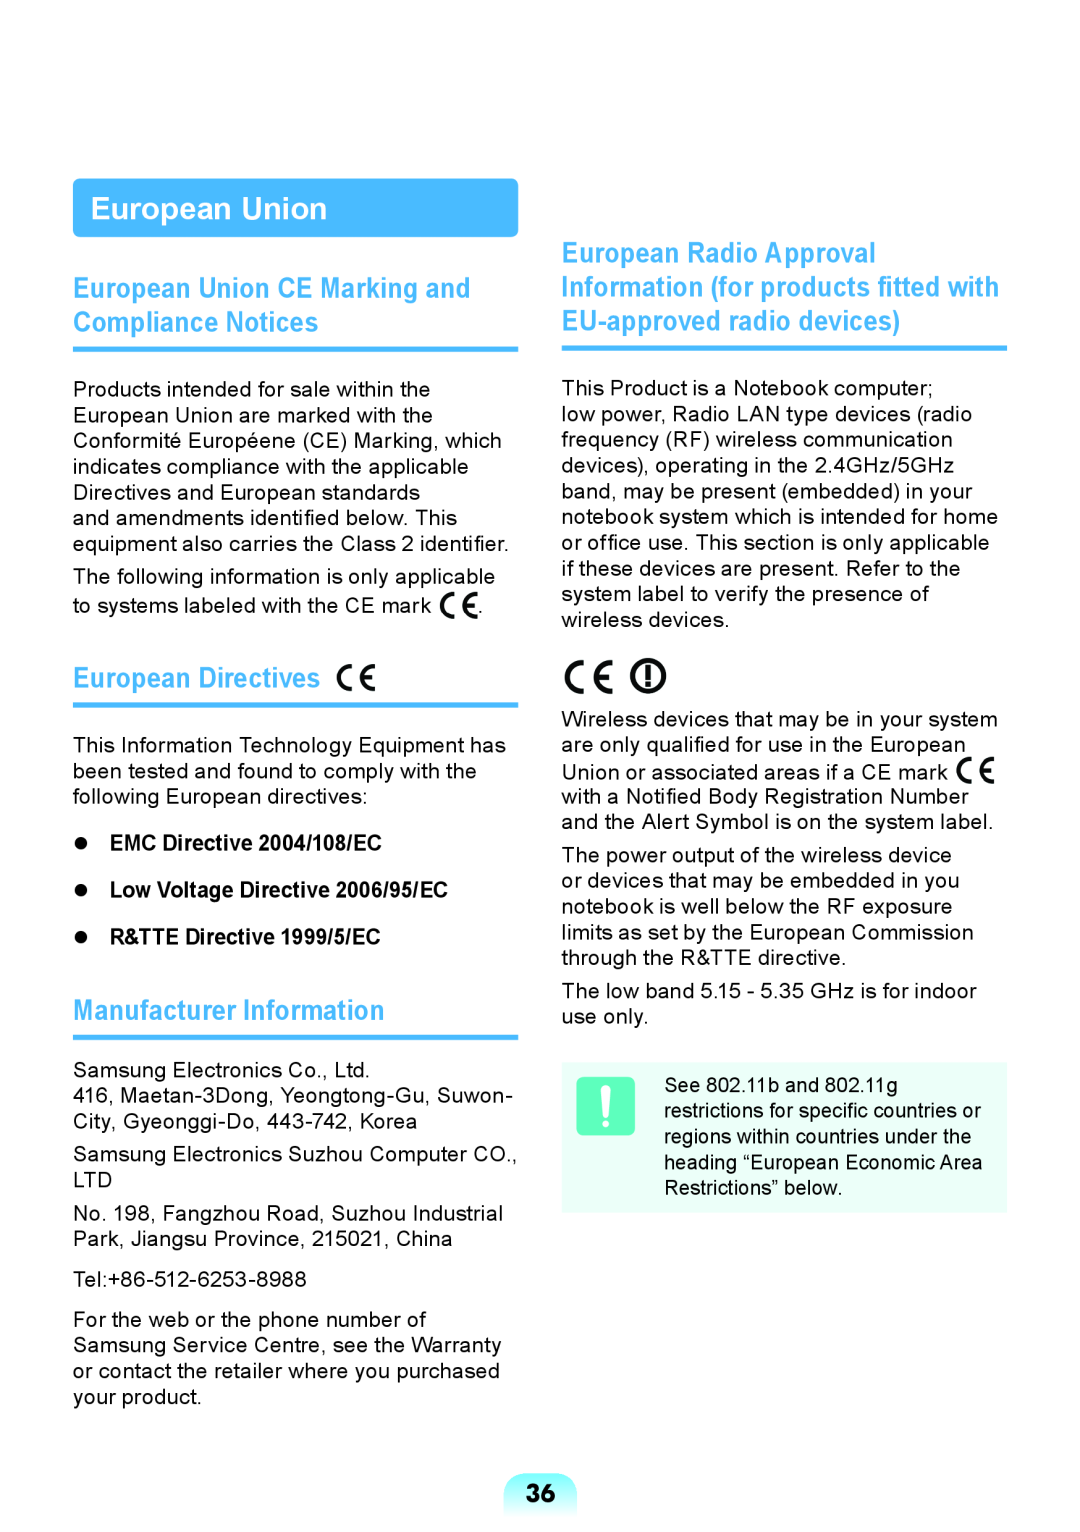 Samsung NP-RV408-A01UA European Union CE Marking and Compliance Notices, European Directives, Manufacturer Information 